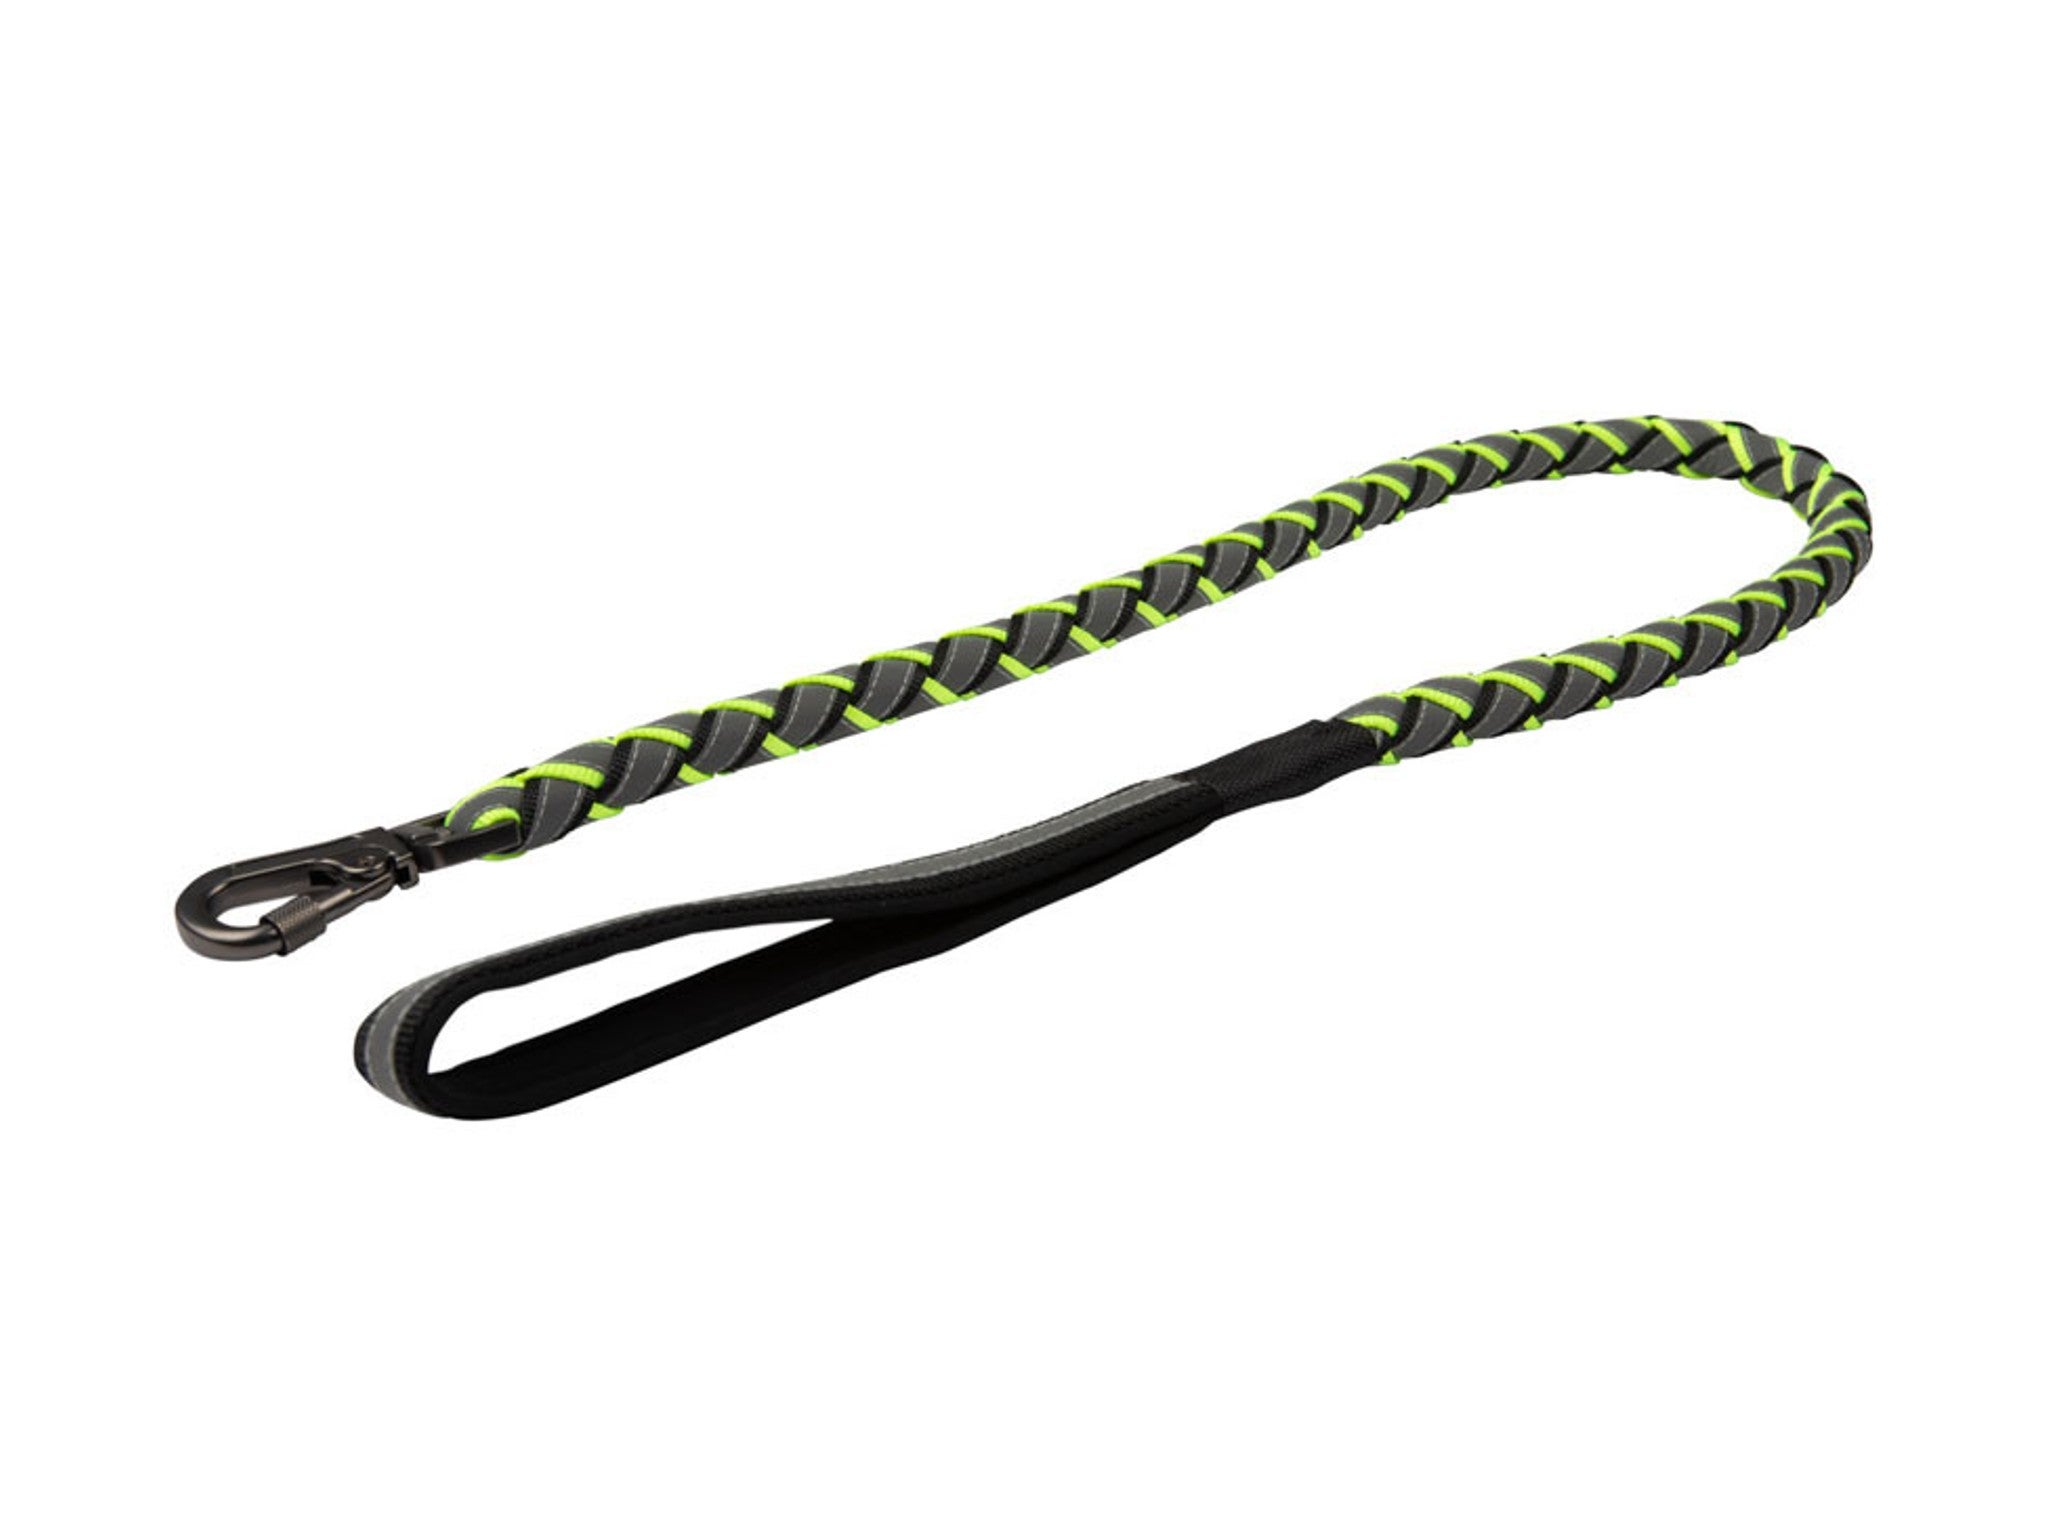 3 Peaks reflective dog lead indybest